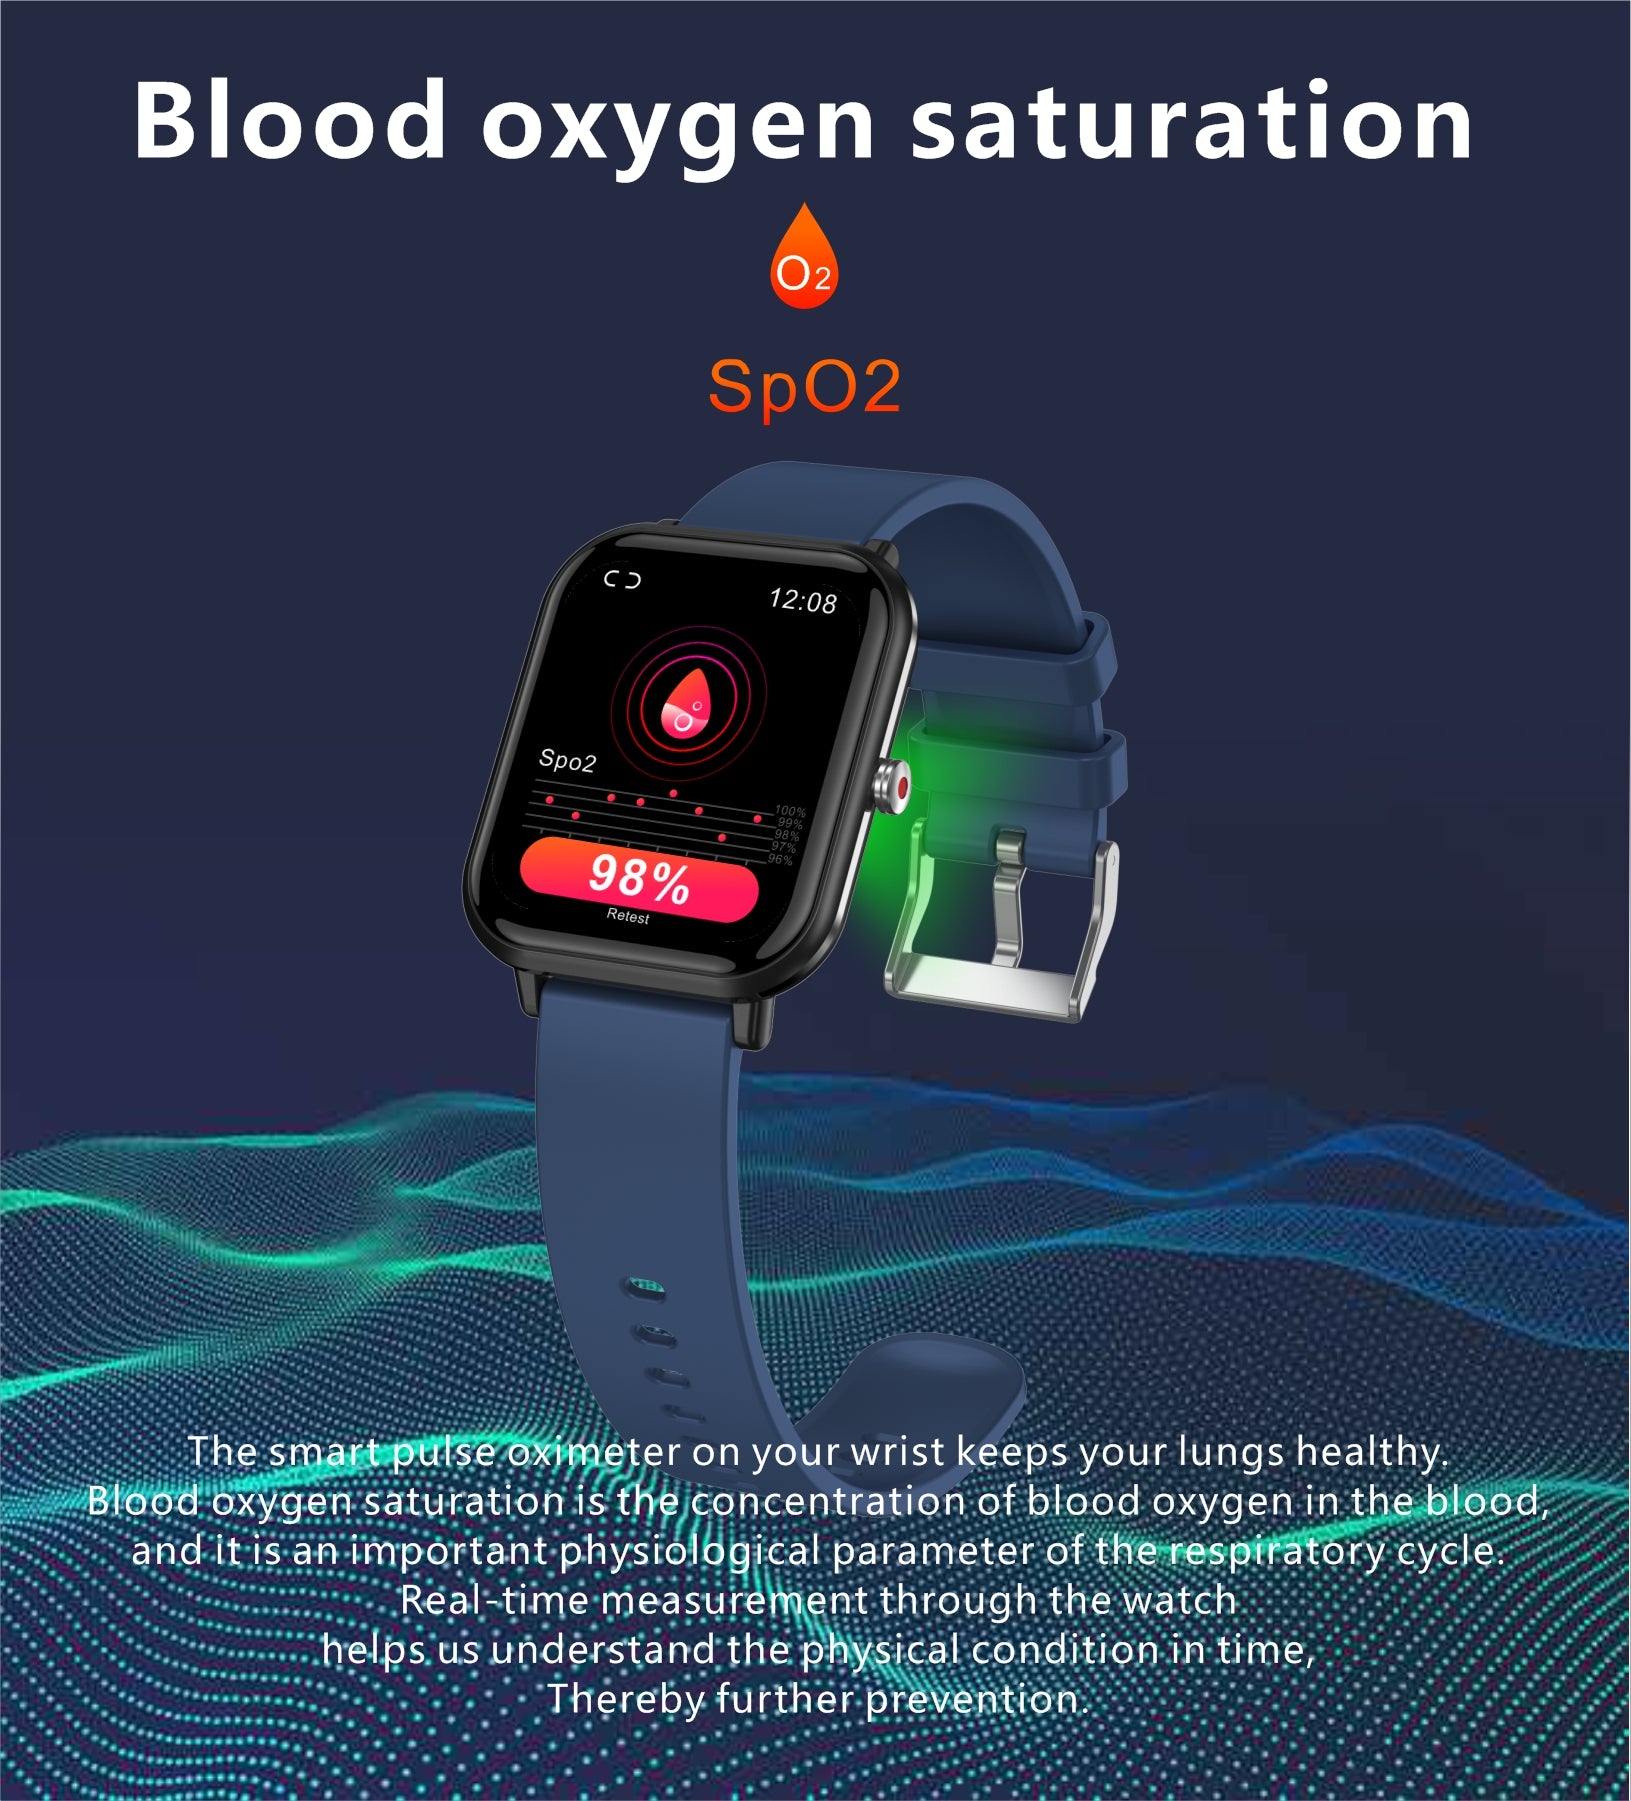 Smart Watch for Men Women with Heat Rate Sleep Blood Pressure Monitor IP68 Waterproof Fitness Tracker of 24 Sports Modes